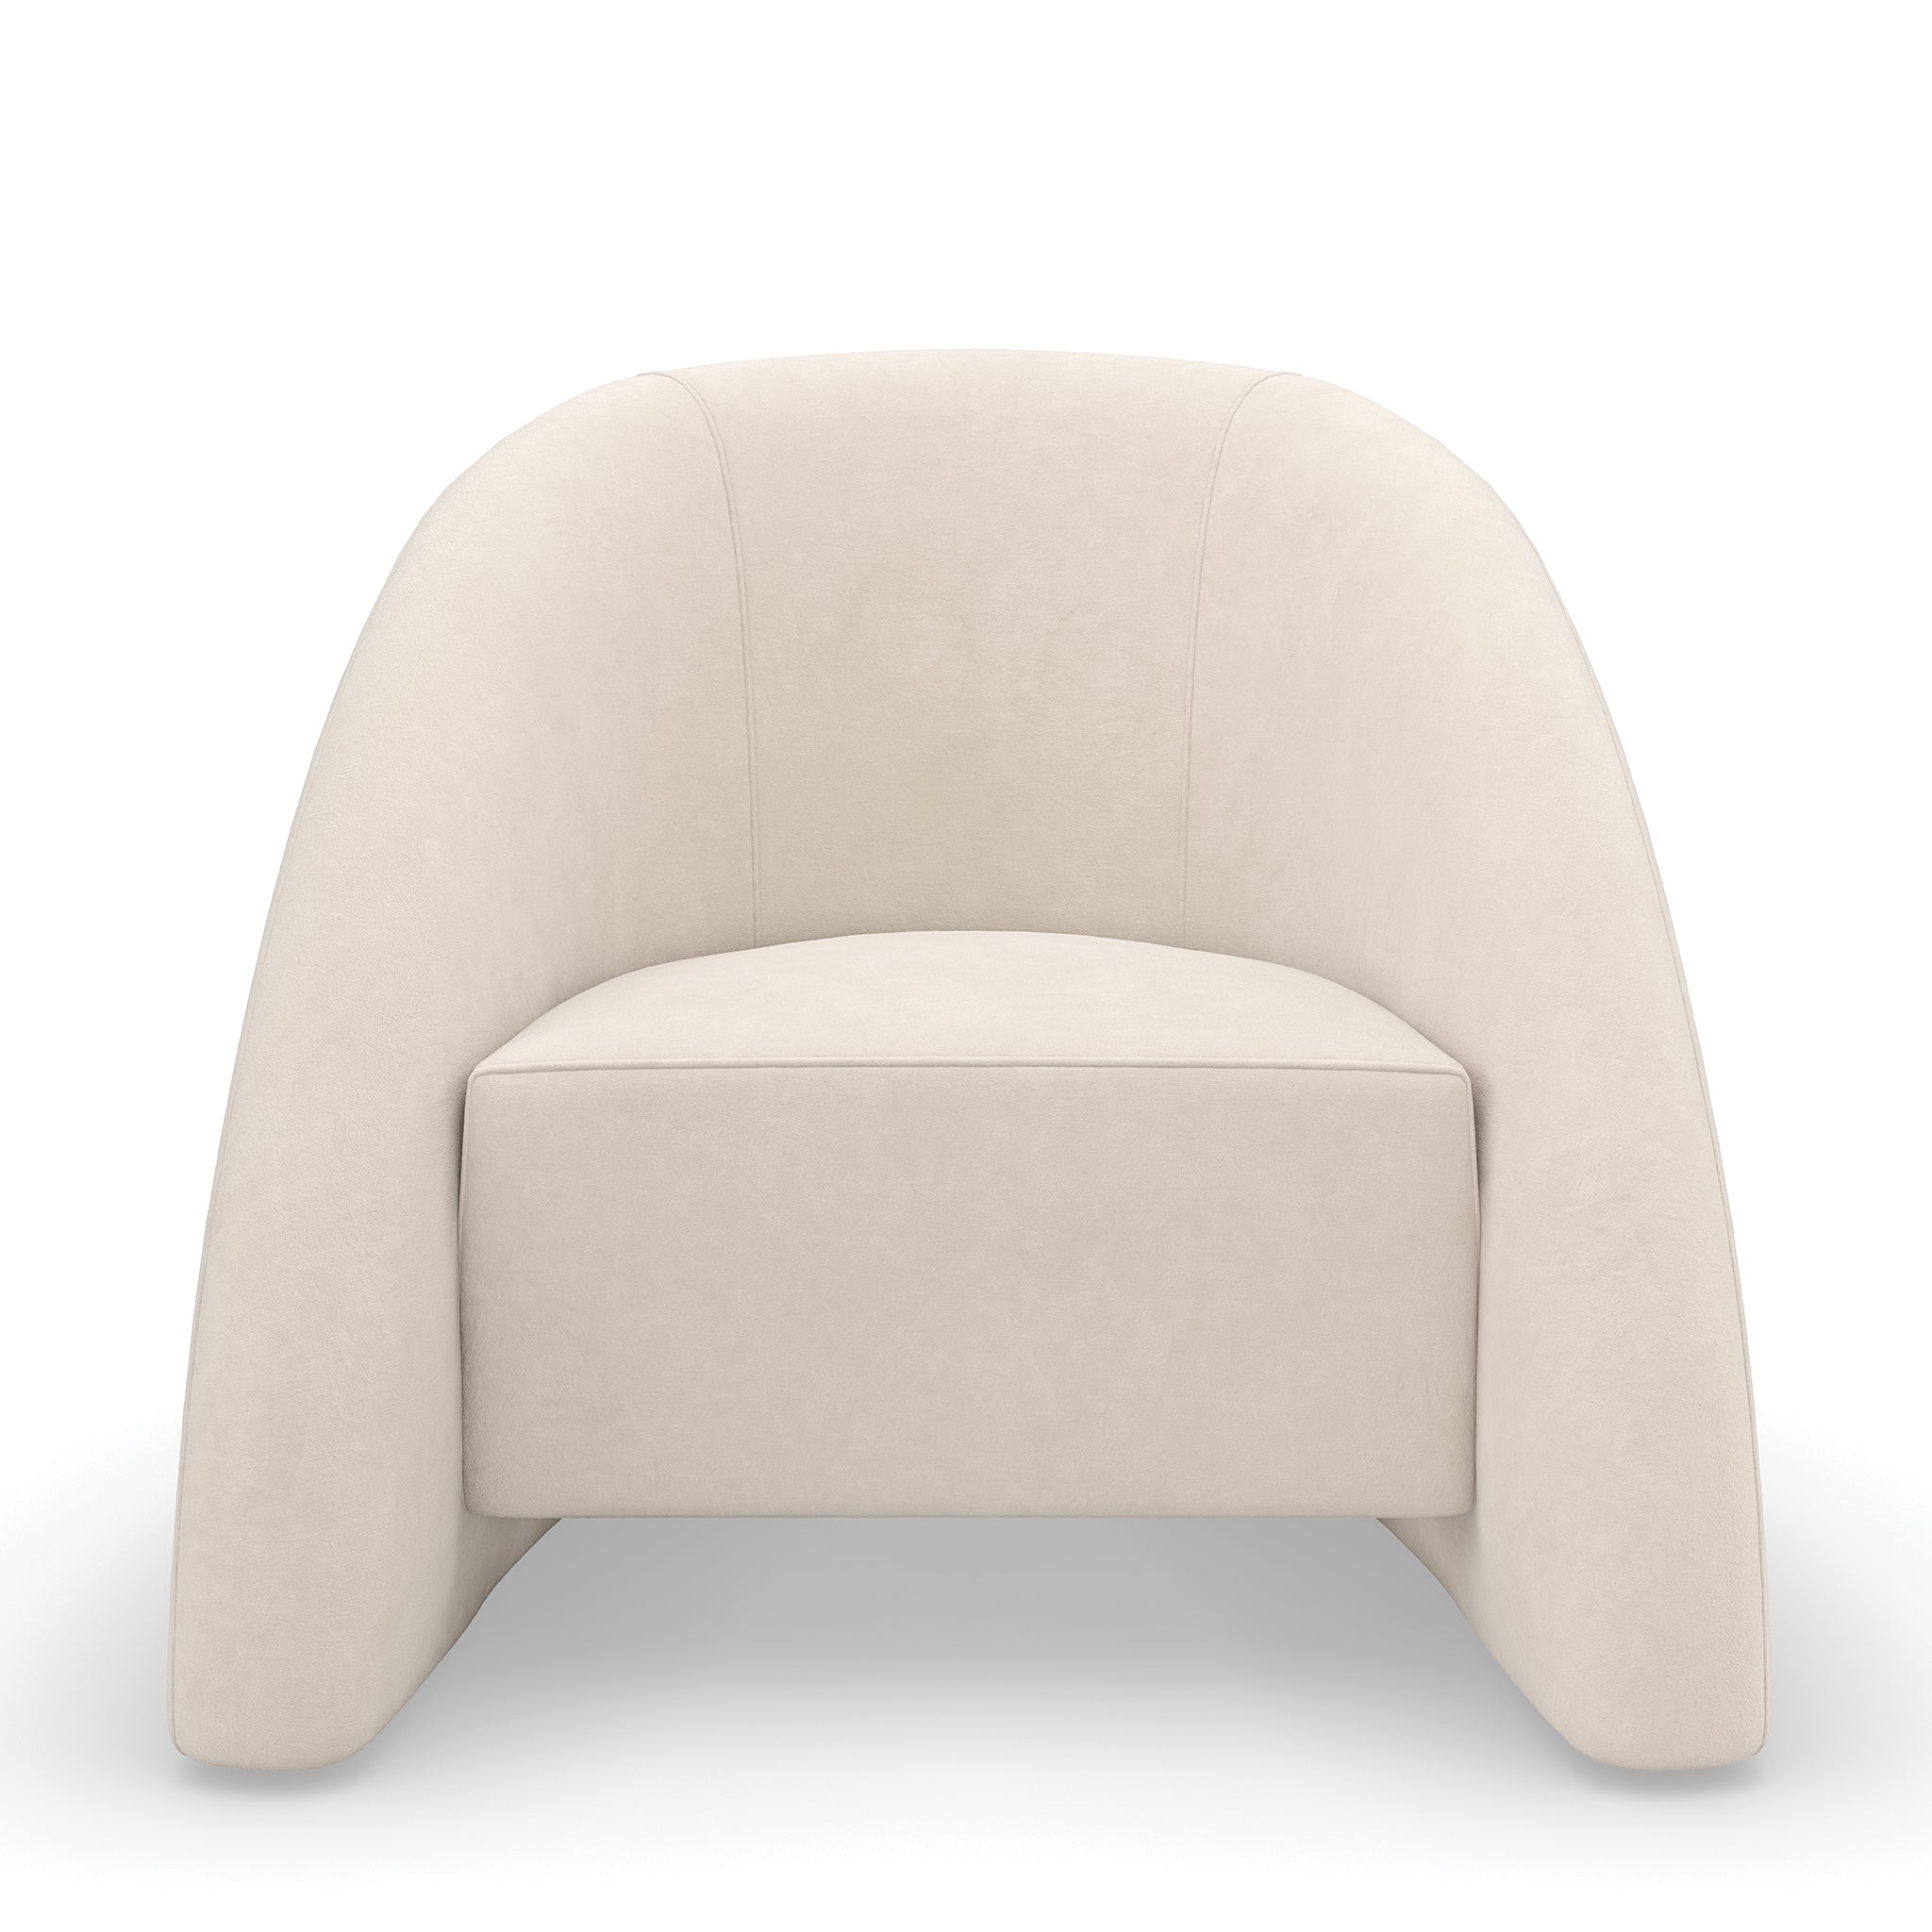 caracole movement chair chairs 